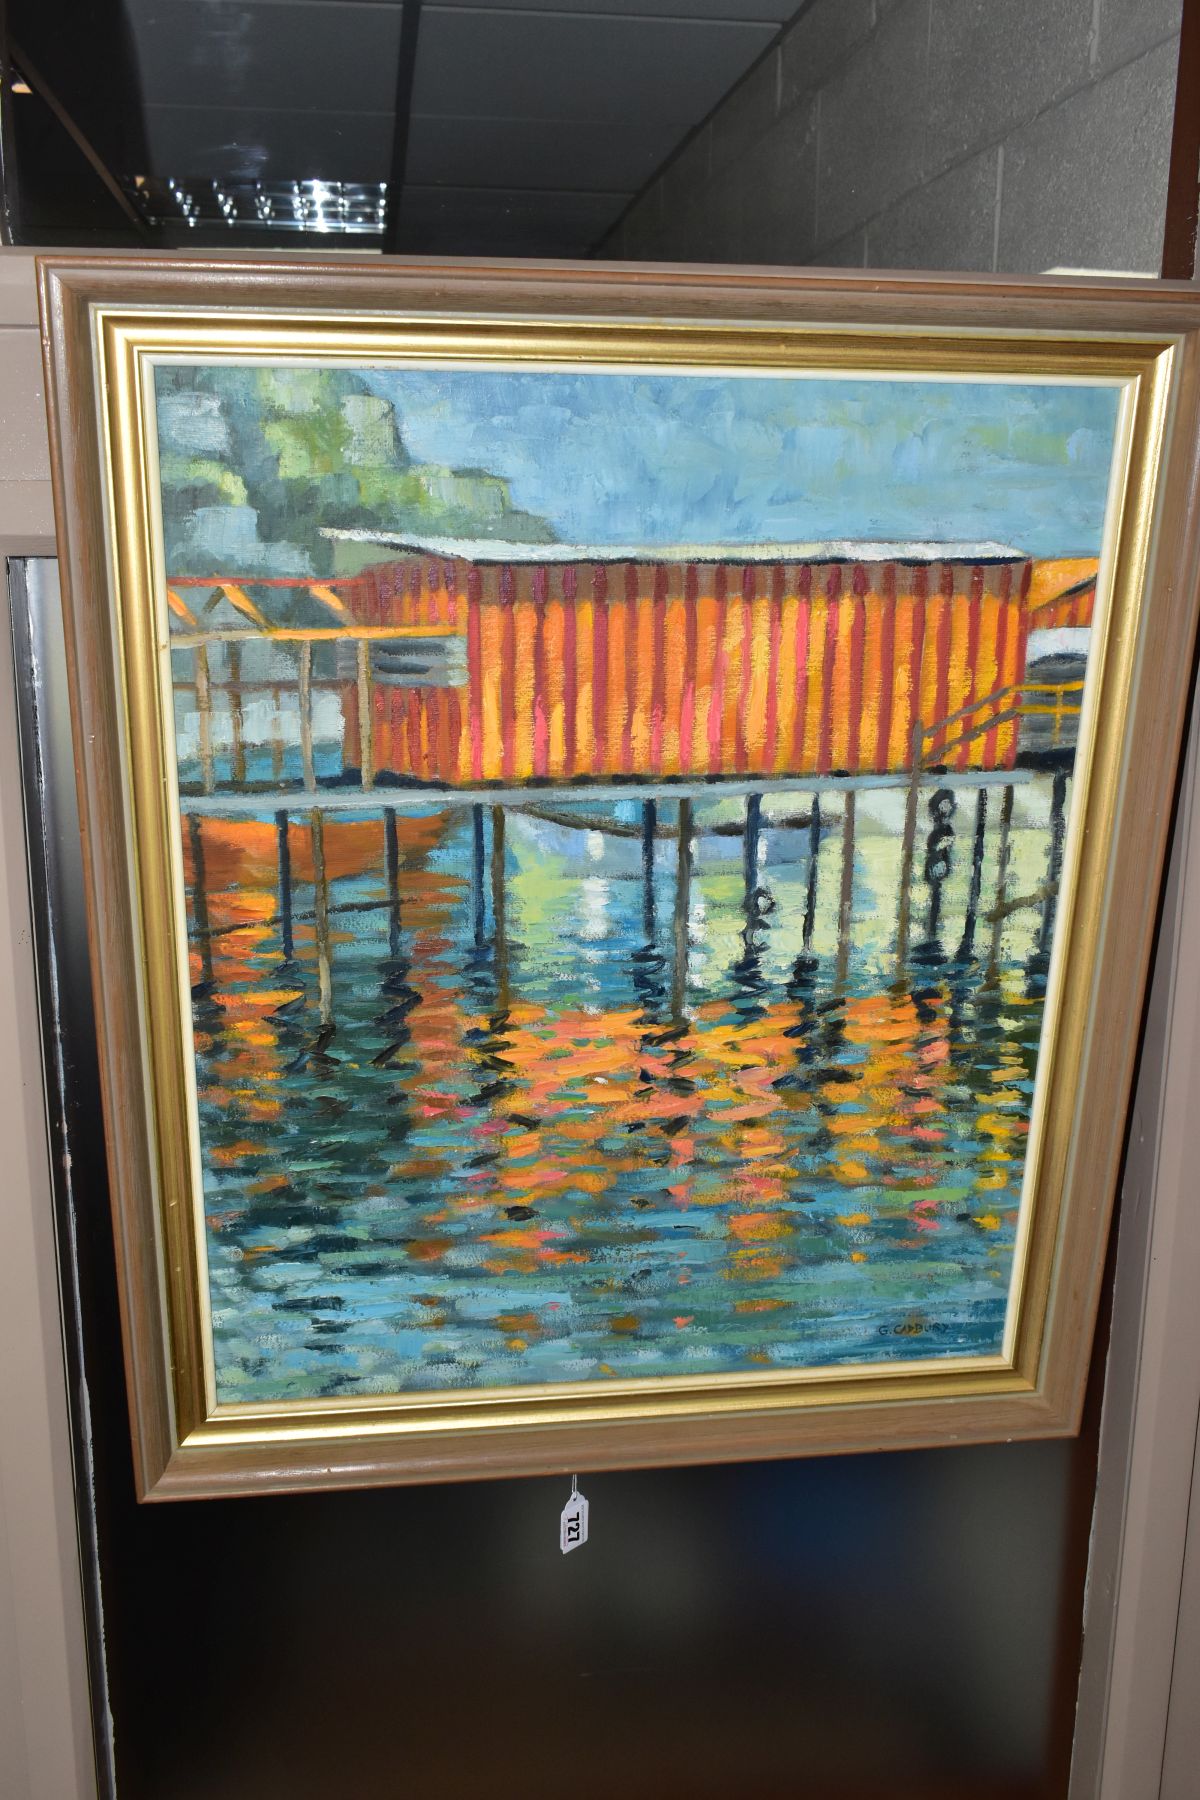 G CADBURY (20TH CENTURY), A COLOURFUL BUILDING ON A PIER OVER WATER, signed bottom right, oil on